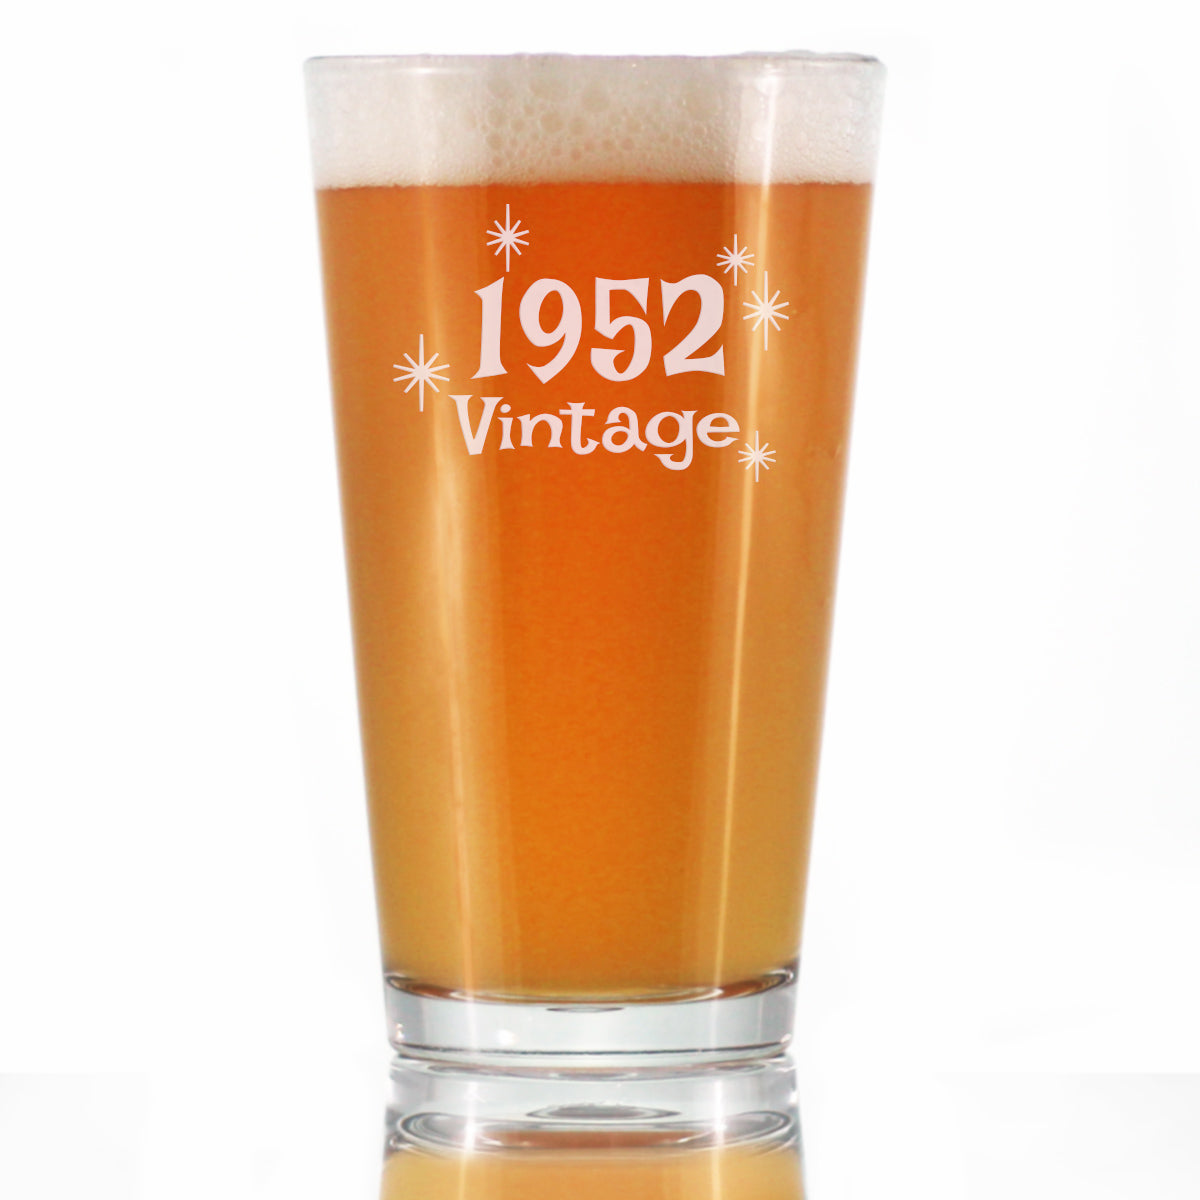 Vintage 1952 - Pint Glass for Beer - 71st Birthday Gifts for Men or Women Turning 71 - Fun Bday Party Decor - 16 oz